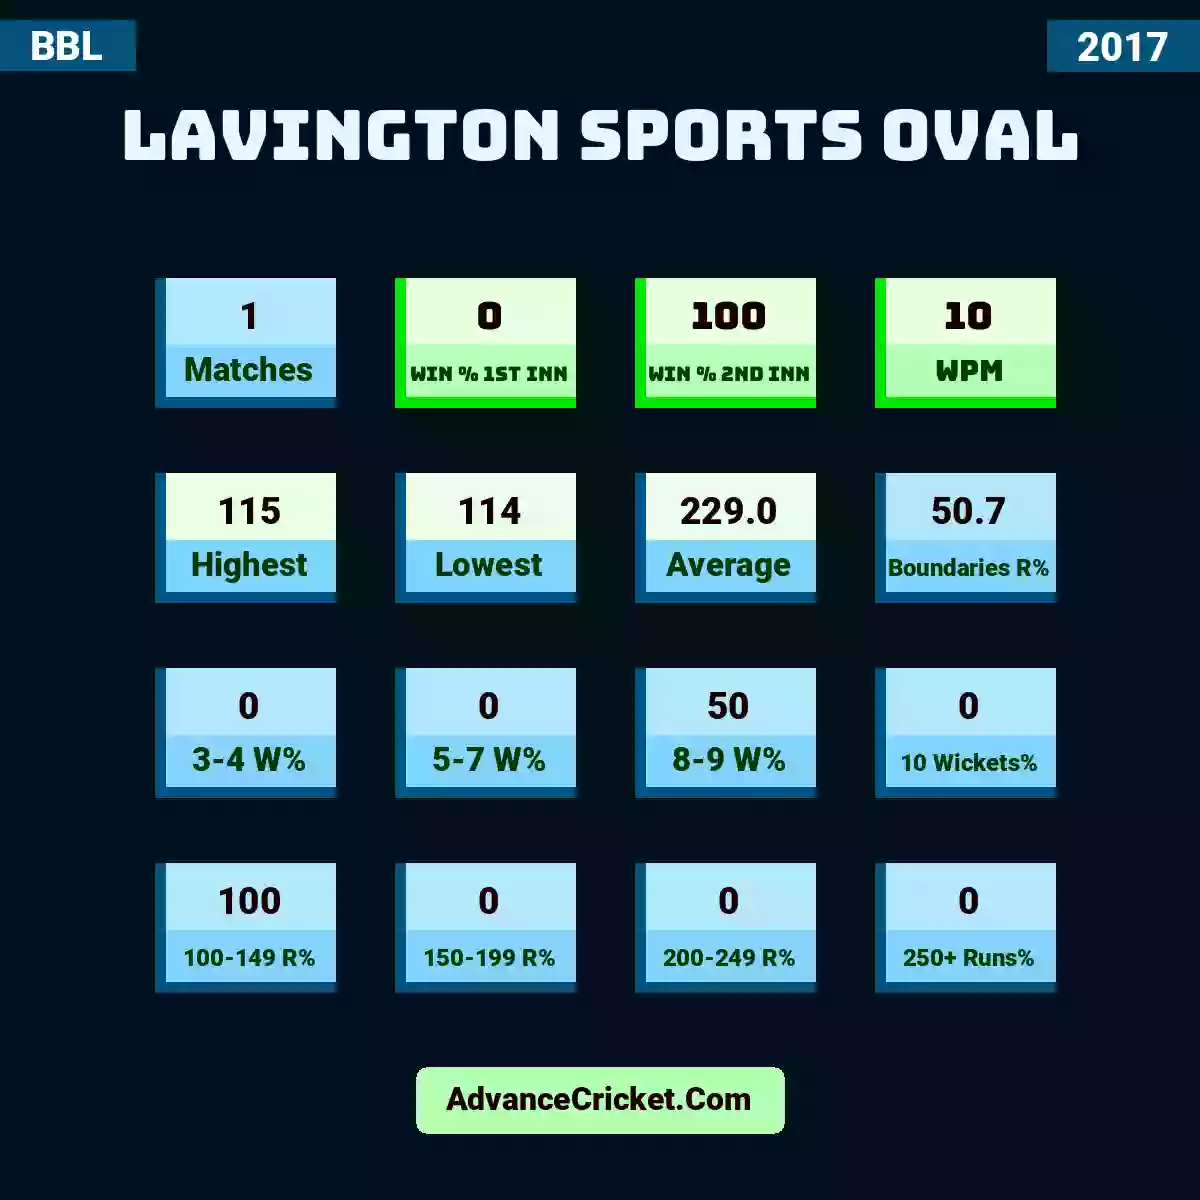 Image showing Lavington Sports Oval with Matches: 1, Win % 1st Inn: 0, Win % 2nd Inn: 100, WPM: 10, Highest: 115, Lowest: 114, Average: 229.0, Boundaries R%: 50.7, 3-4 W%: 0, 5-7 W%: 0, 8-9 W%: 50, 10 Wickets%: 0, 100-149 R%: 100, 150-199 R%: 0, 200-249 R%: 0, 250+ Runs%: 0.